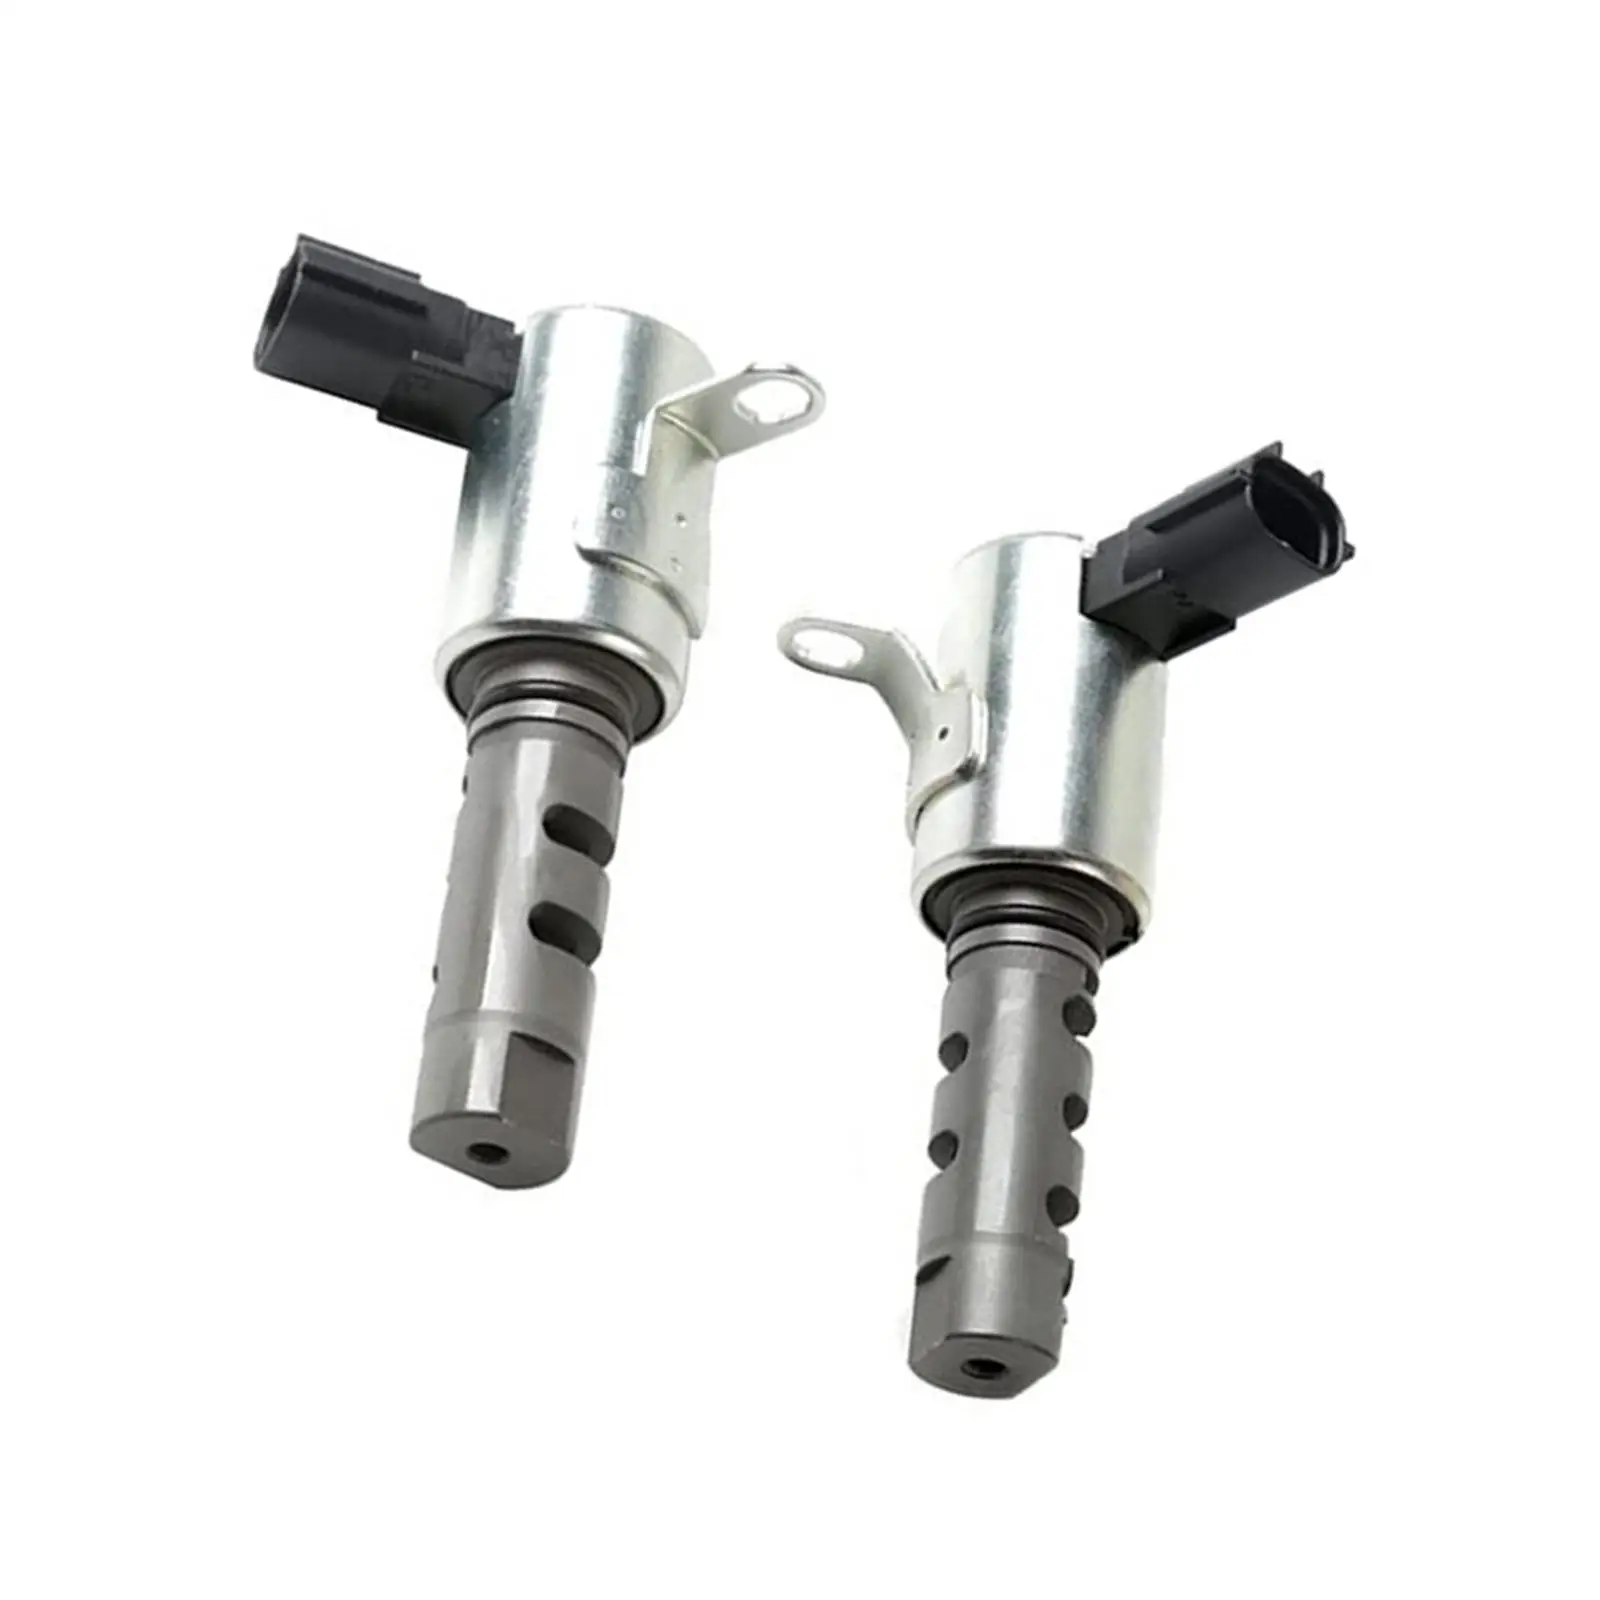 2x Automotive Vvt Valve Variable Timing Solenoid 15330-20010 15340-20010 Left Right Durable Replacement